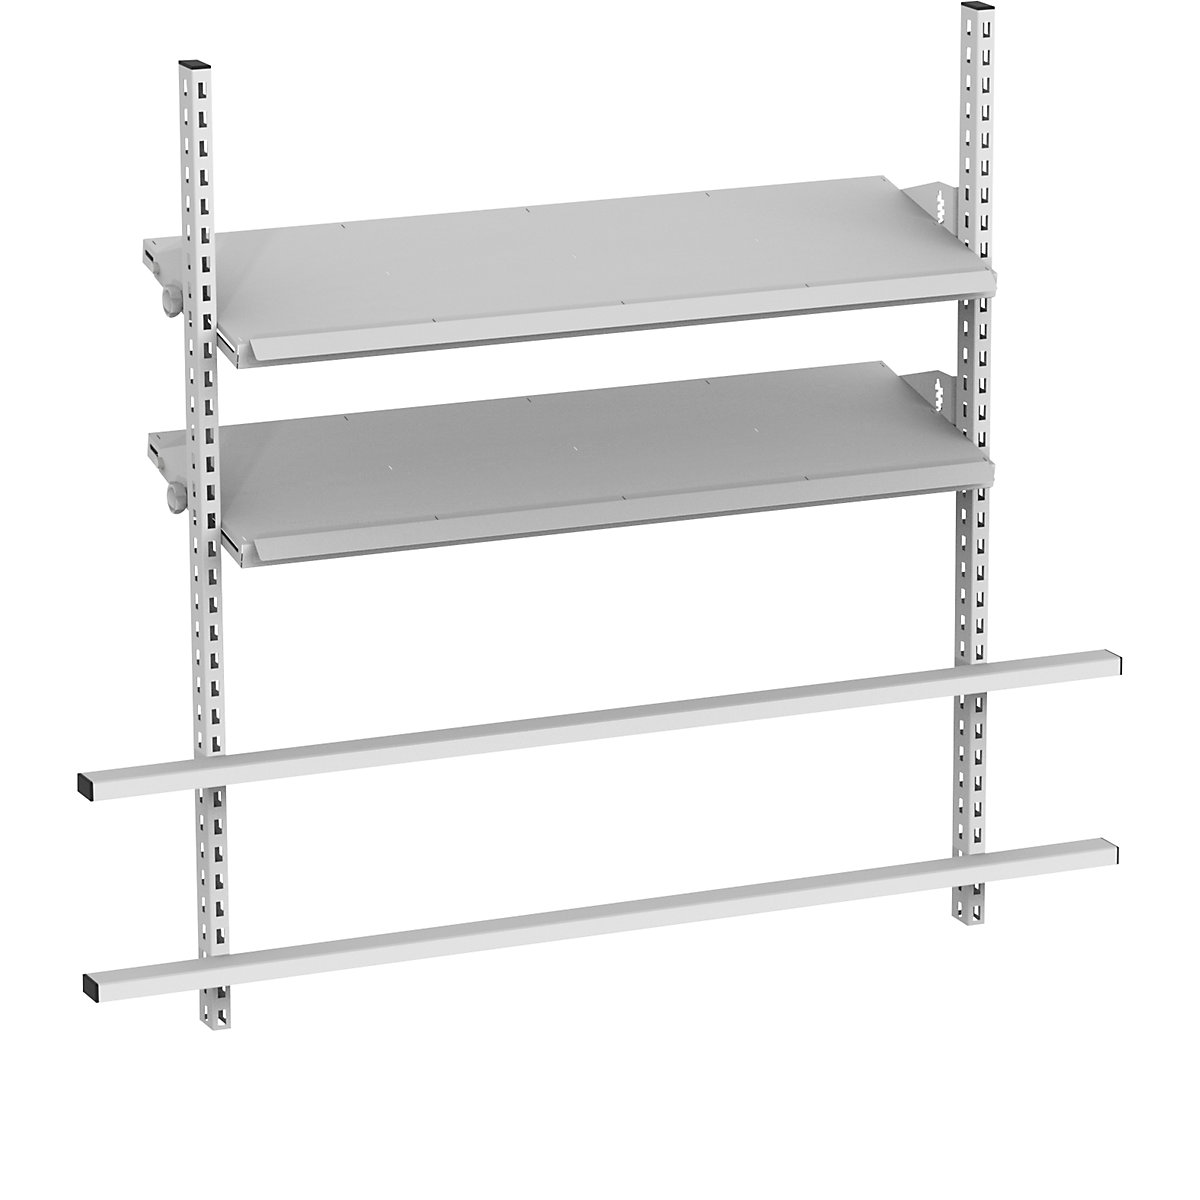 Add-on for table with inclined shelves